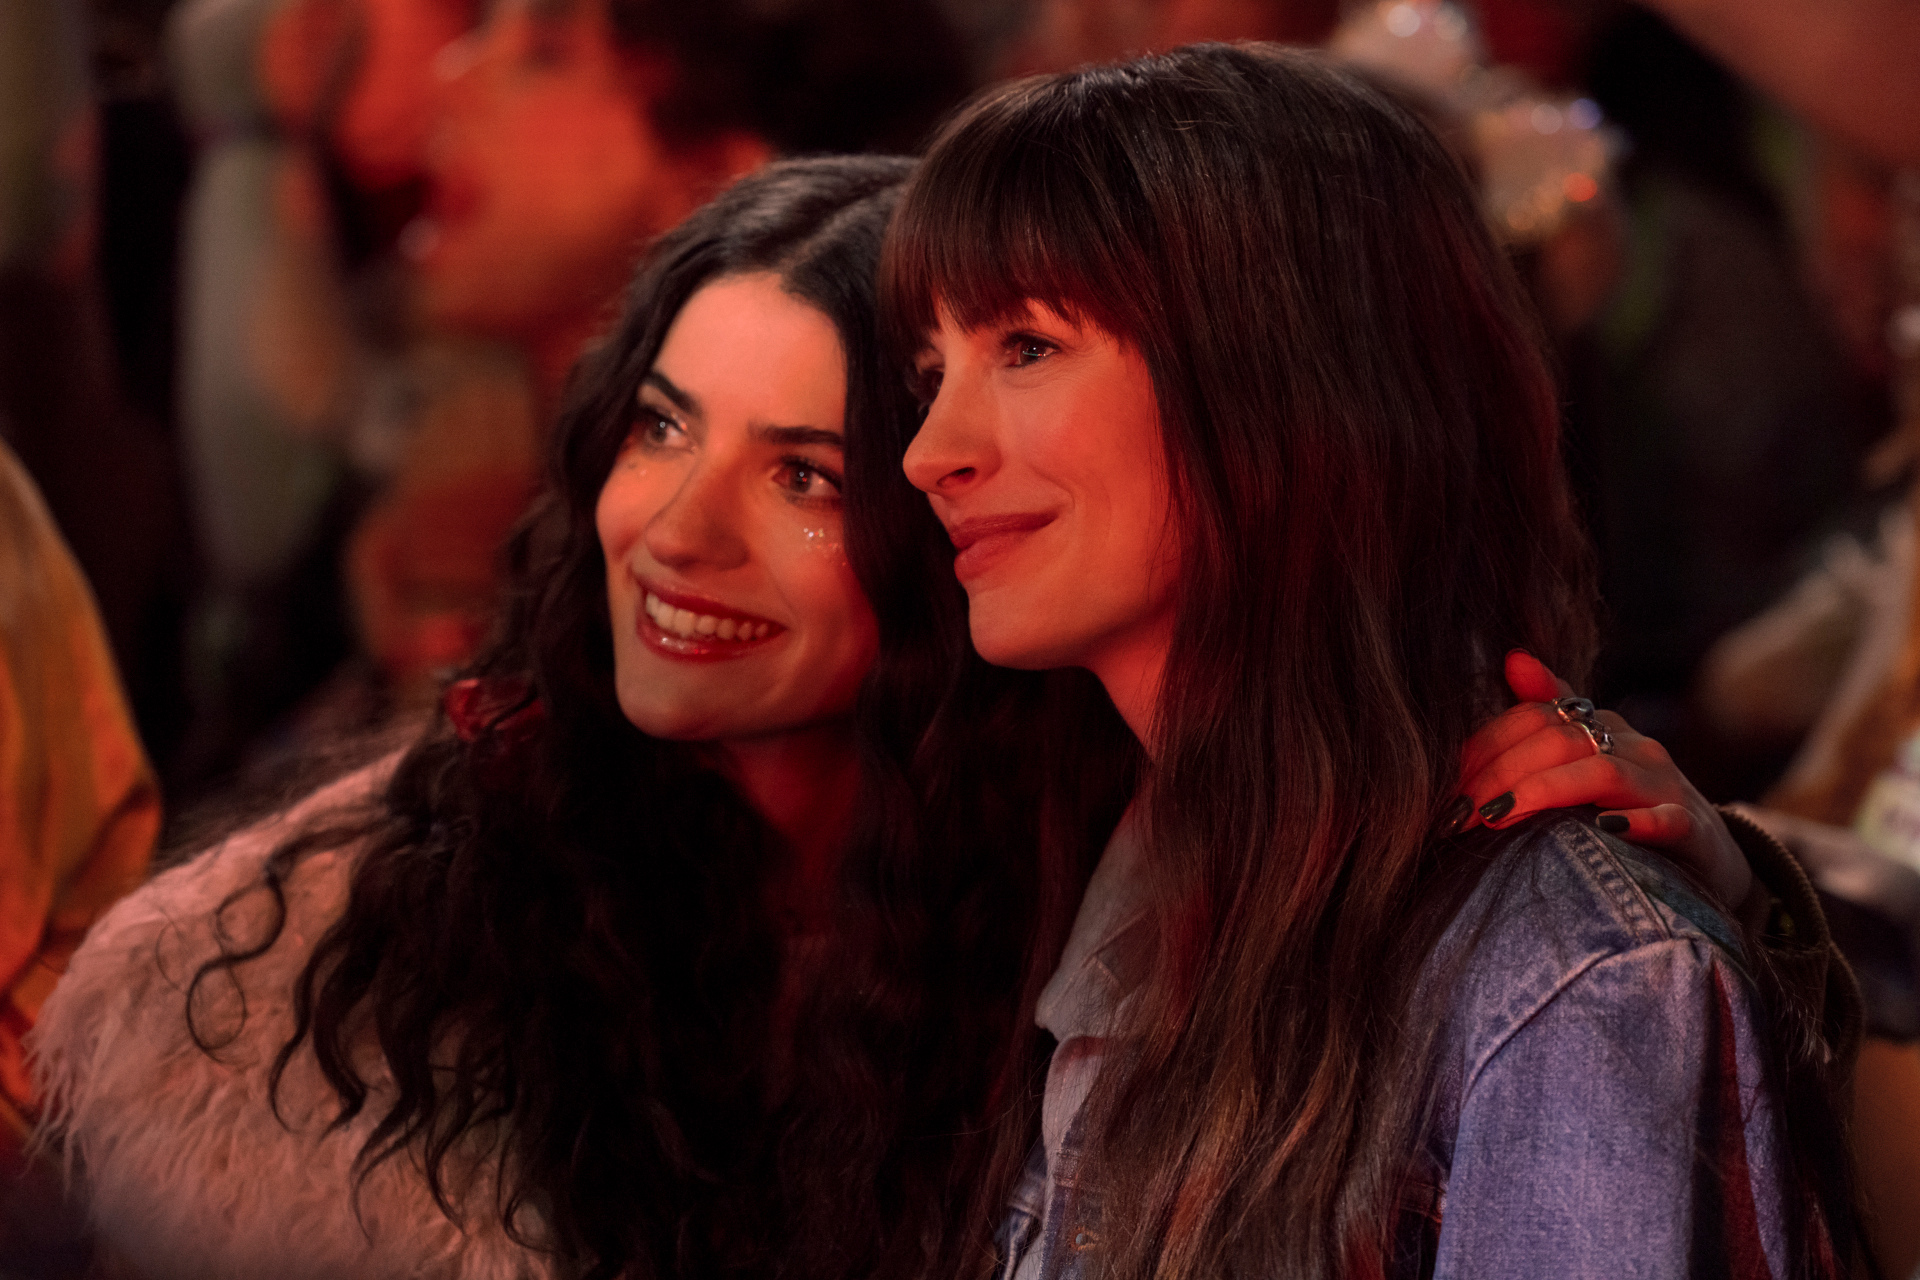 Anne Hathaway as 'Solène' and Ella Rubin as 'Izzy' star in THE IDEA OF YOU